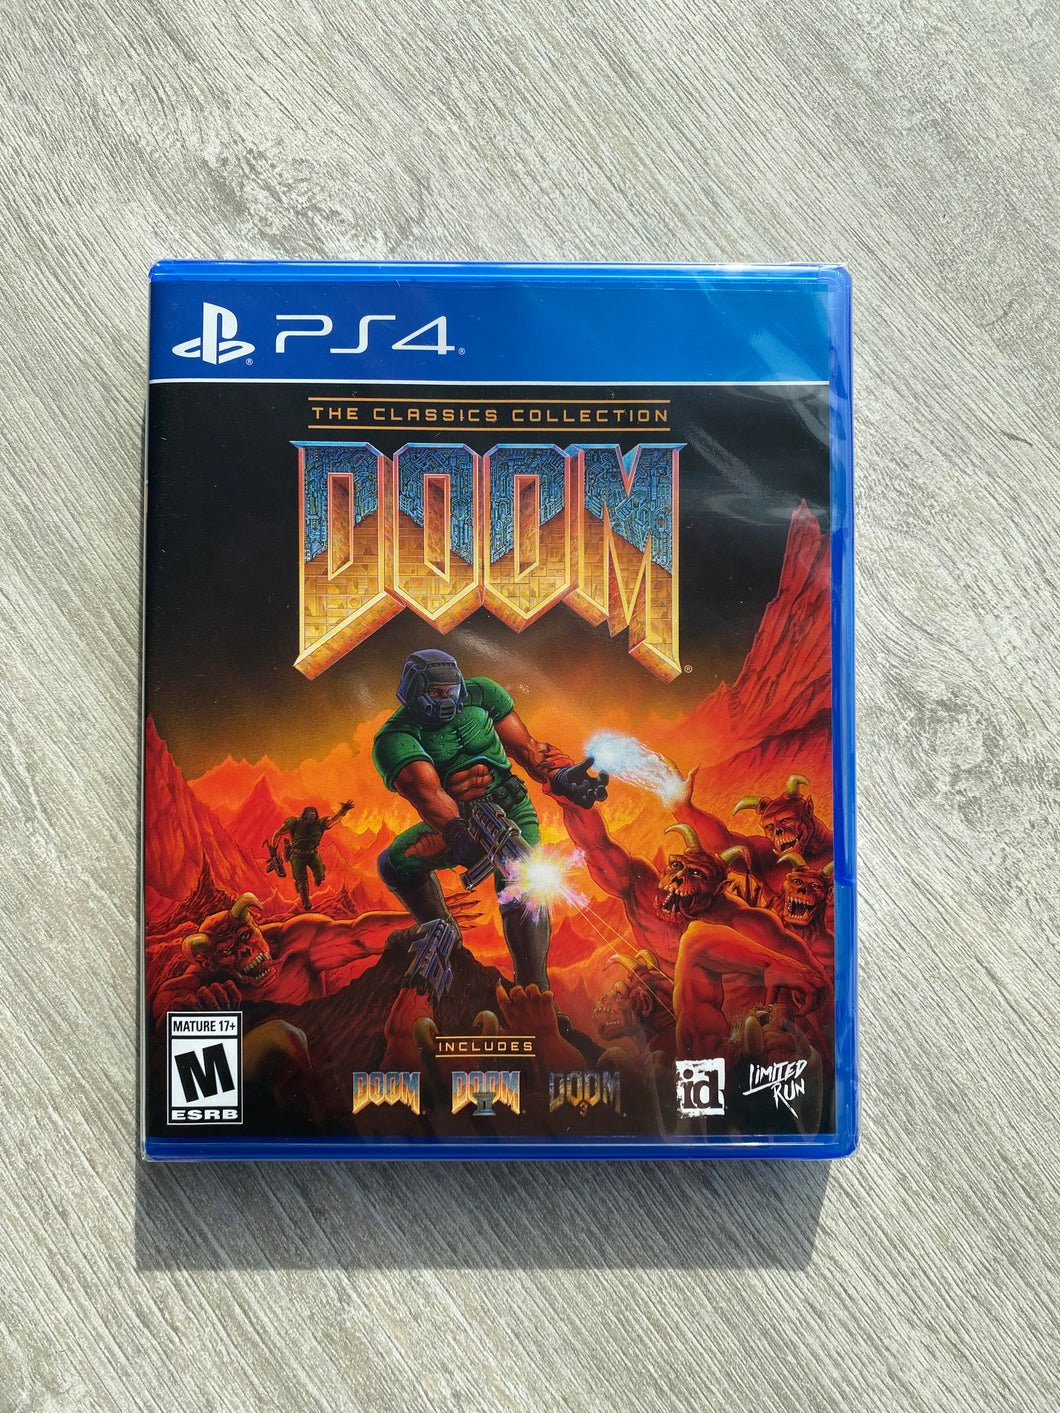 Doom The classic collection / Limited run games / PS4